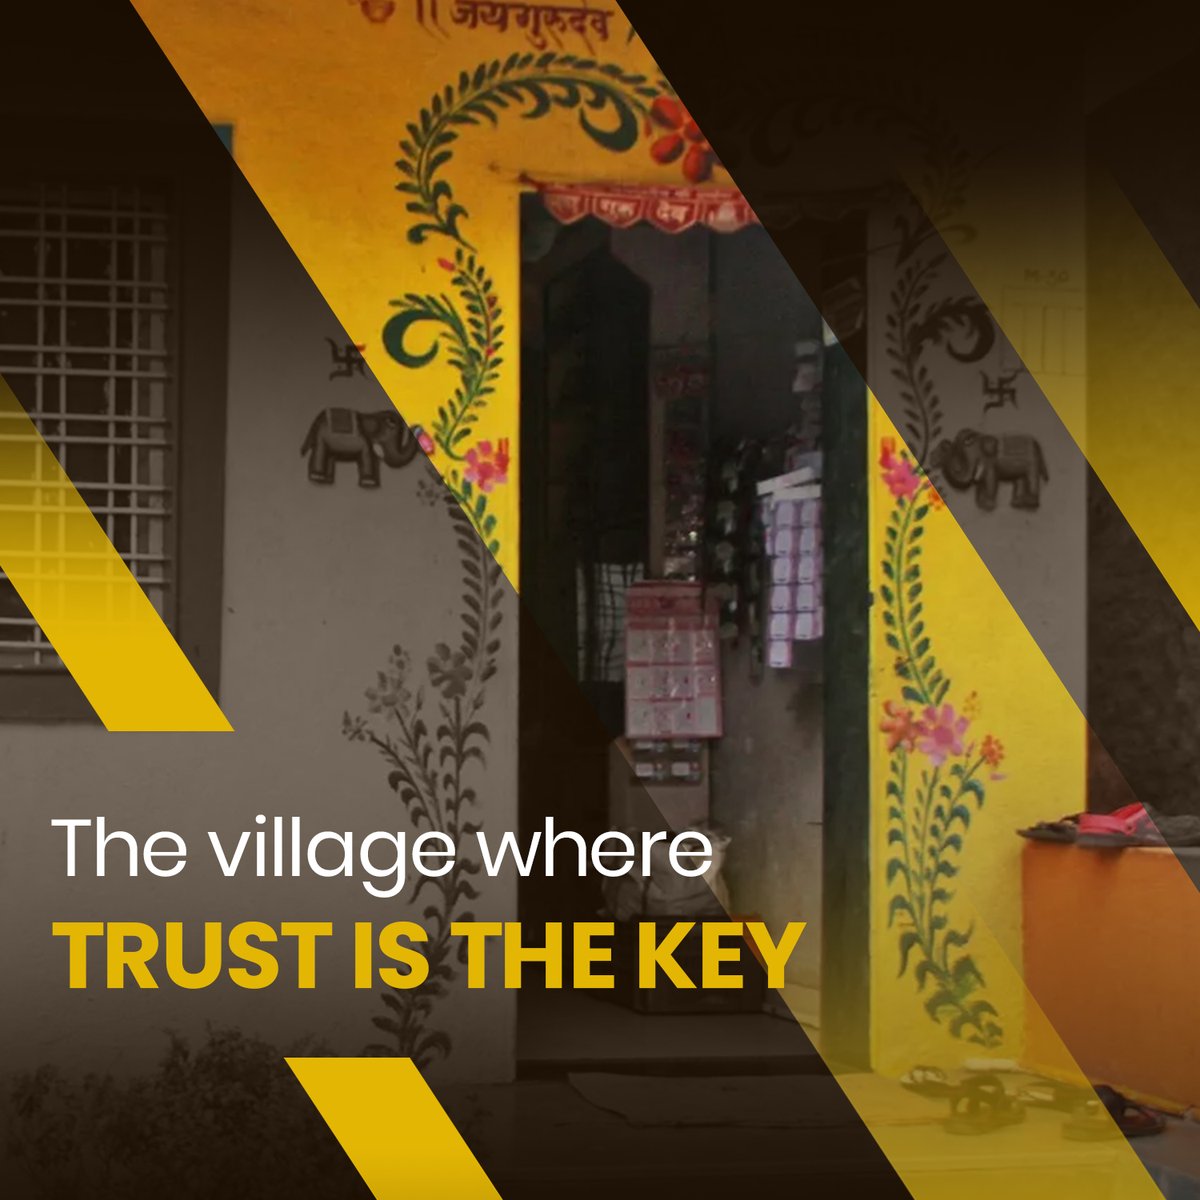 Welcome to Shani Shingnapur, where doors and locks are mere decorations. This extraordinary village thrives on the unwavering faith in Lord Shani's divine protection. Discover the secrets of this unique place and unlock the power of belief. 
#ShaniShingnapur #MaharashtraJayate